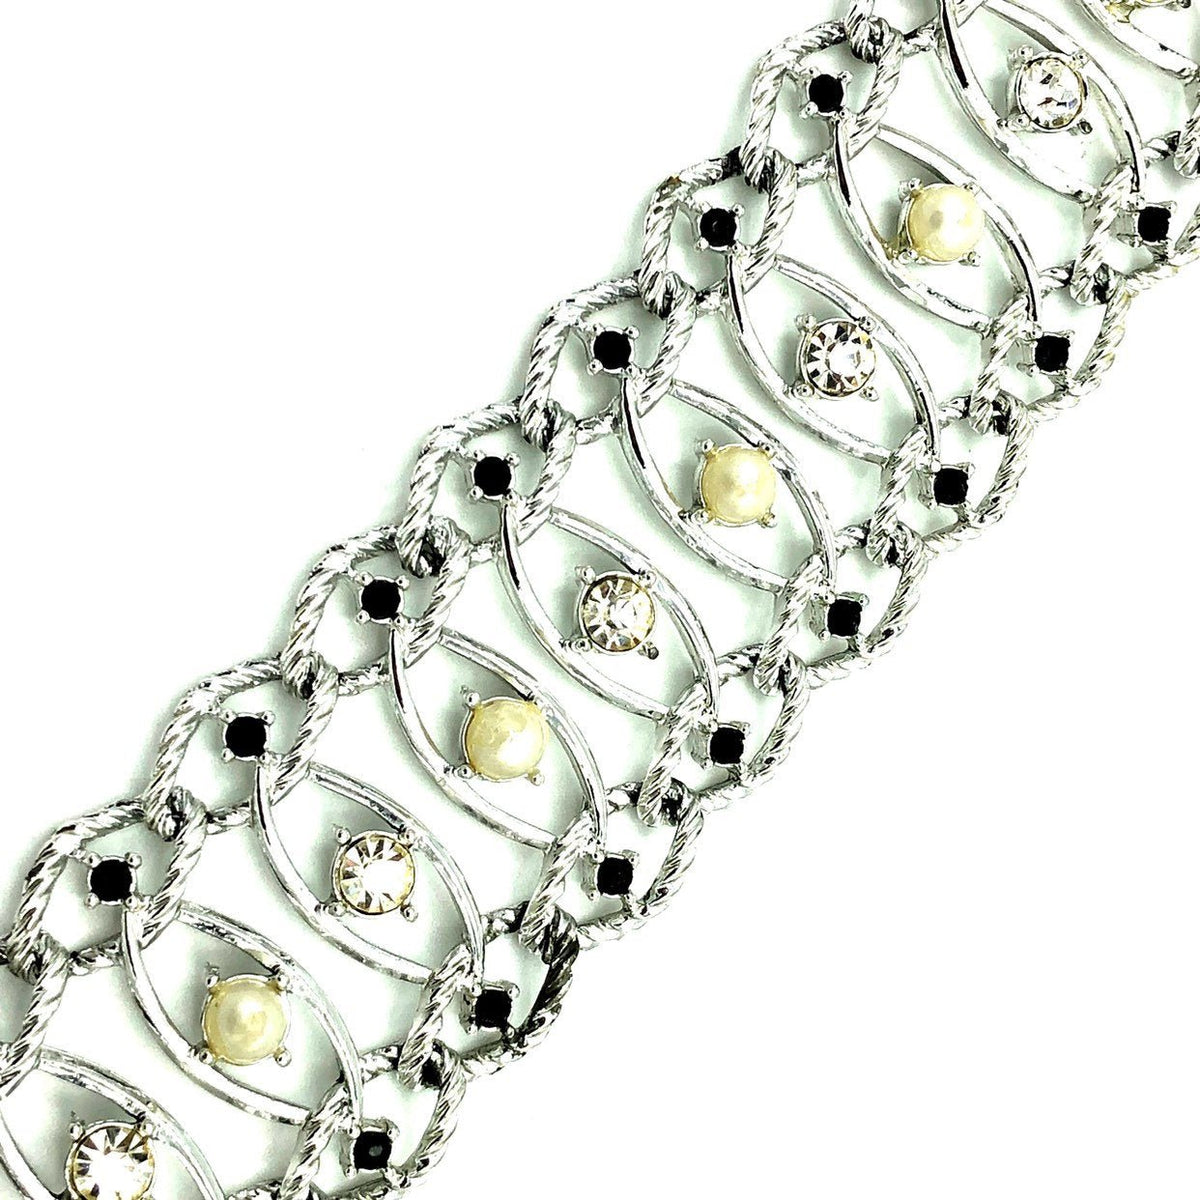 Wide Silver Emmons Chain Link Pearl Rhinestone Bracelet - 24 Wishes Vintage Jewelry